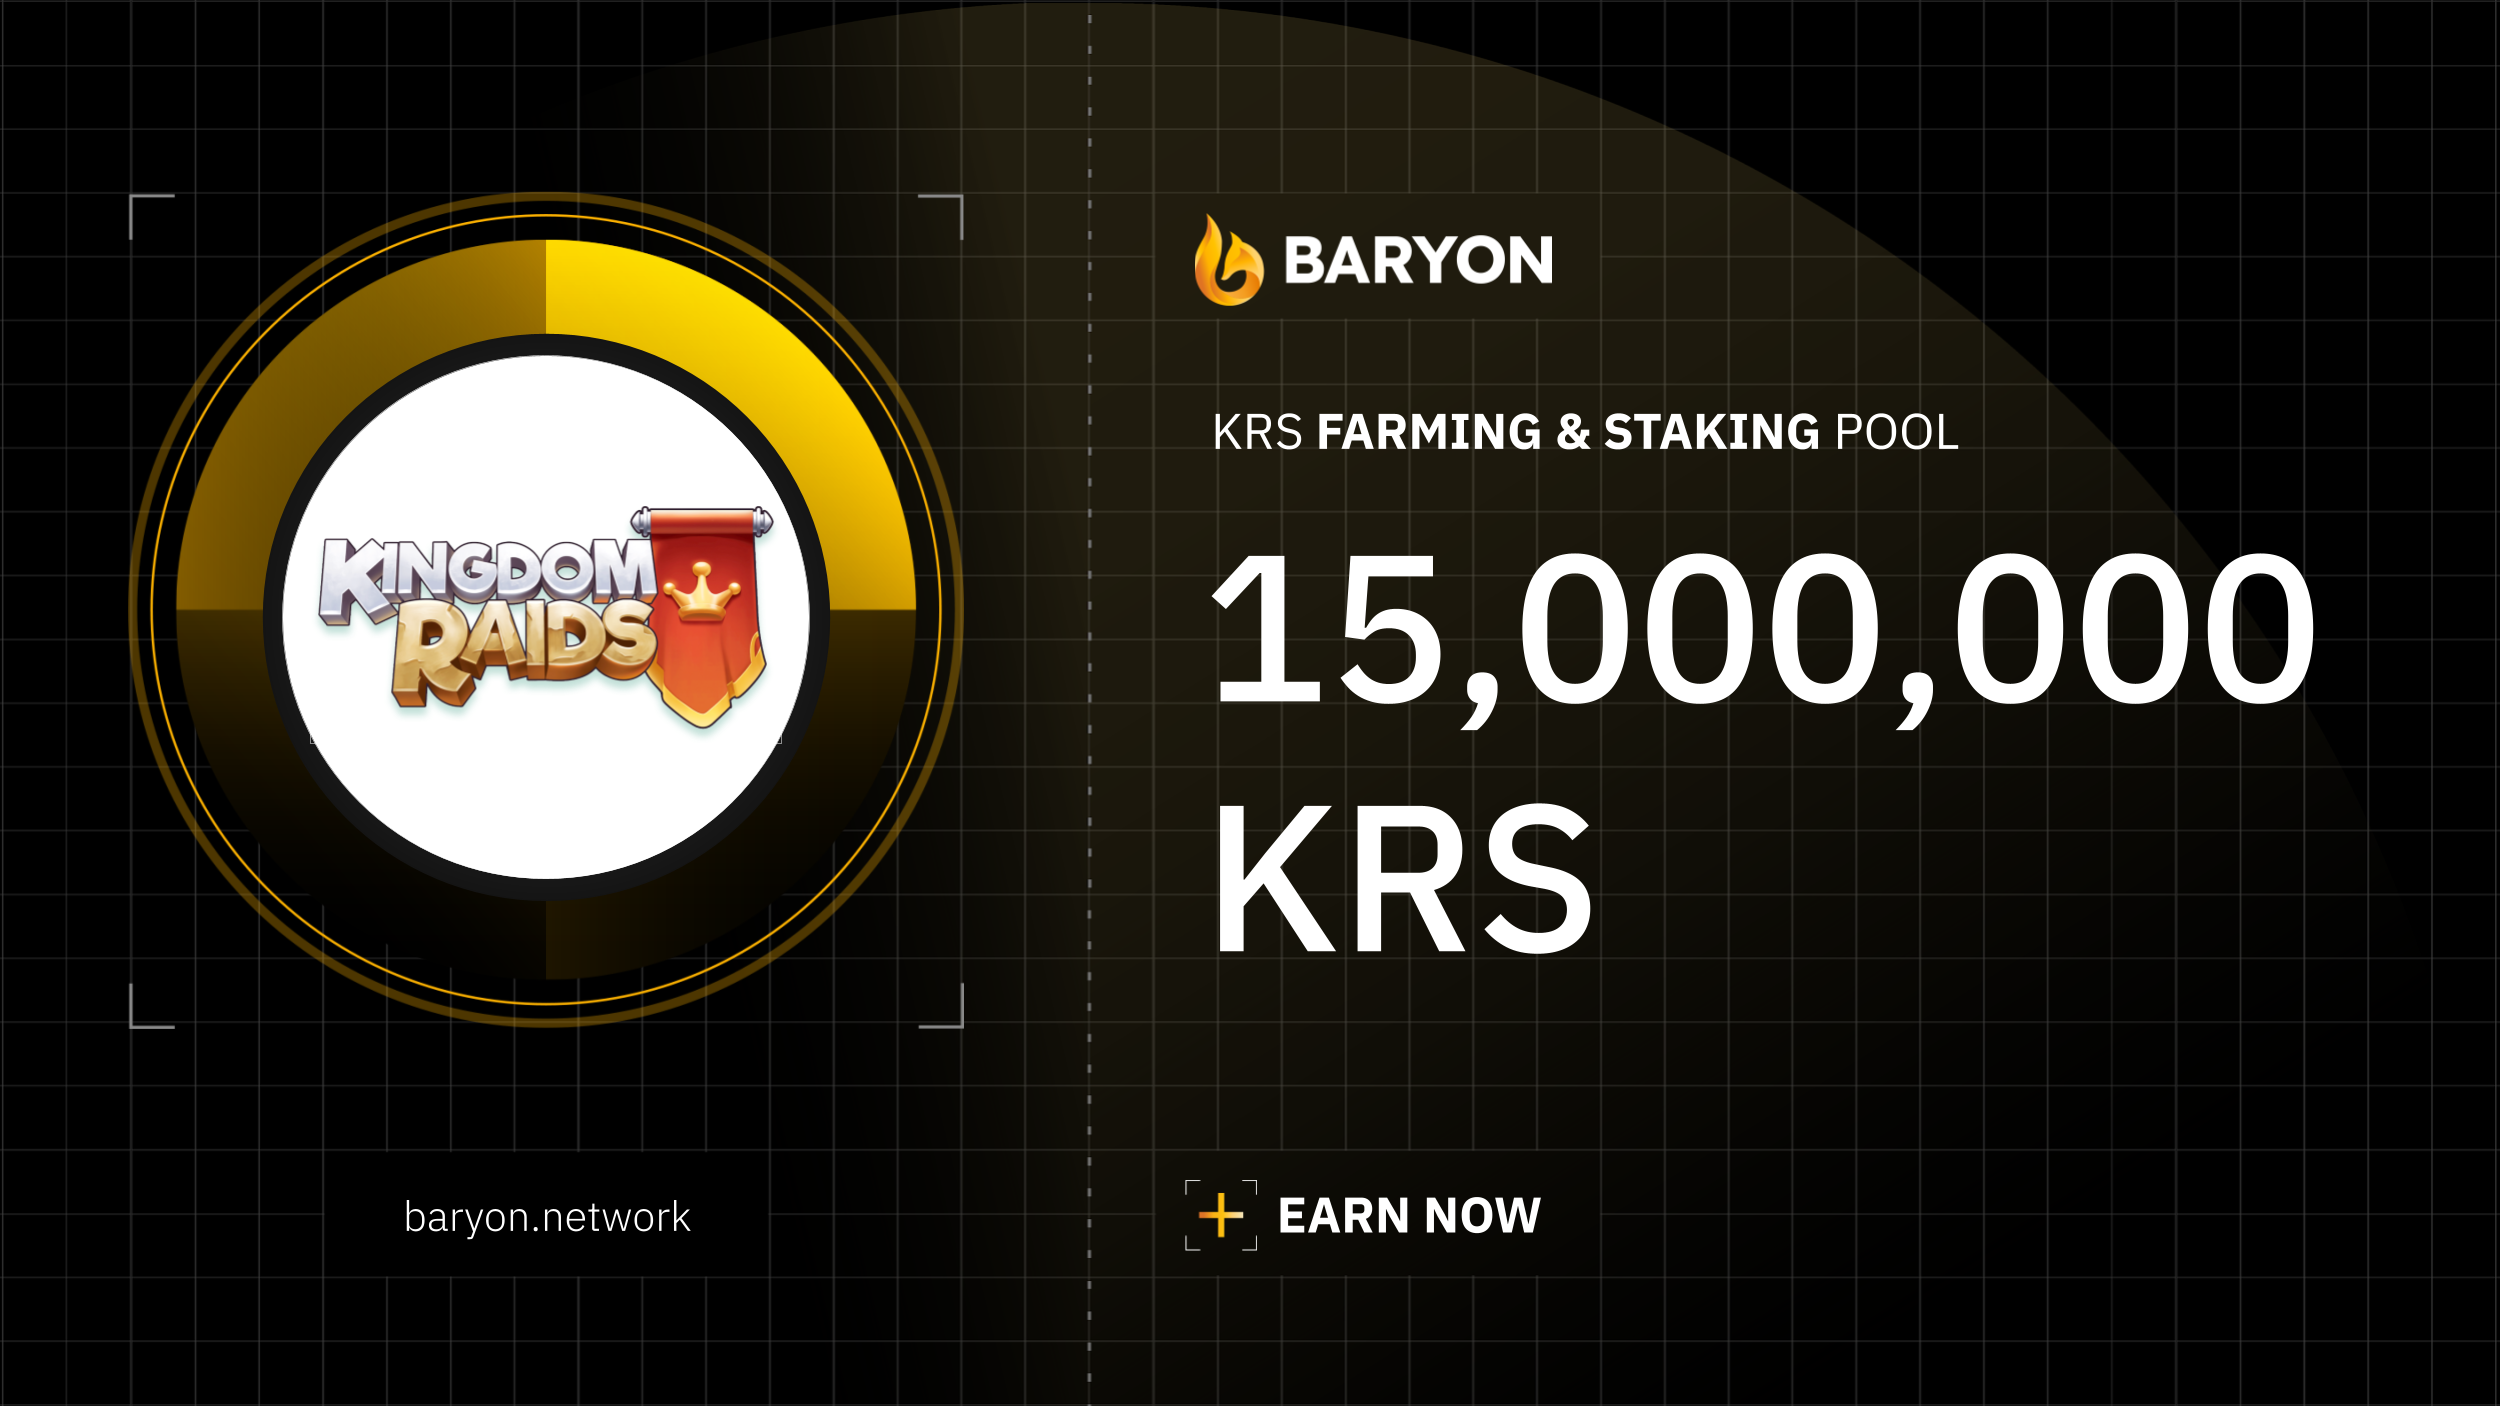 KRS Pool is live on Baryon with lucrative rewards of 15,000,000 KRS